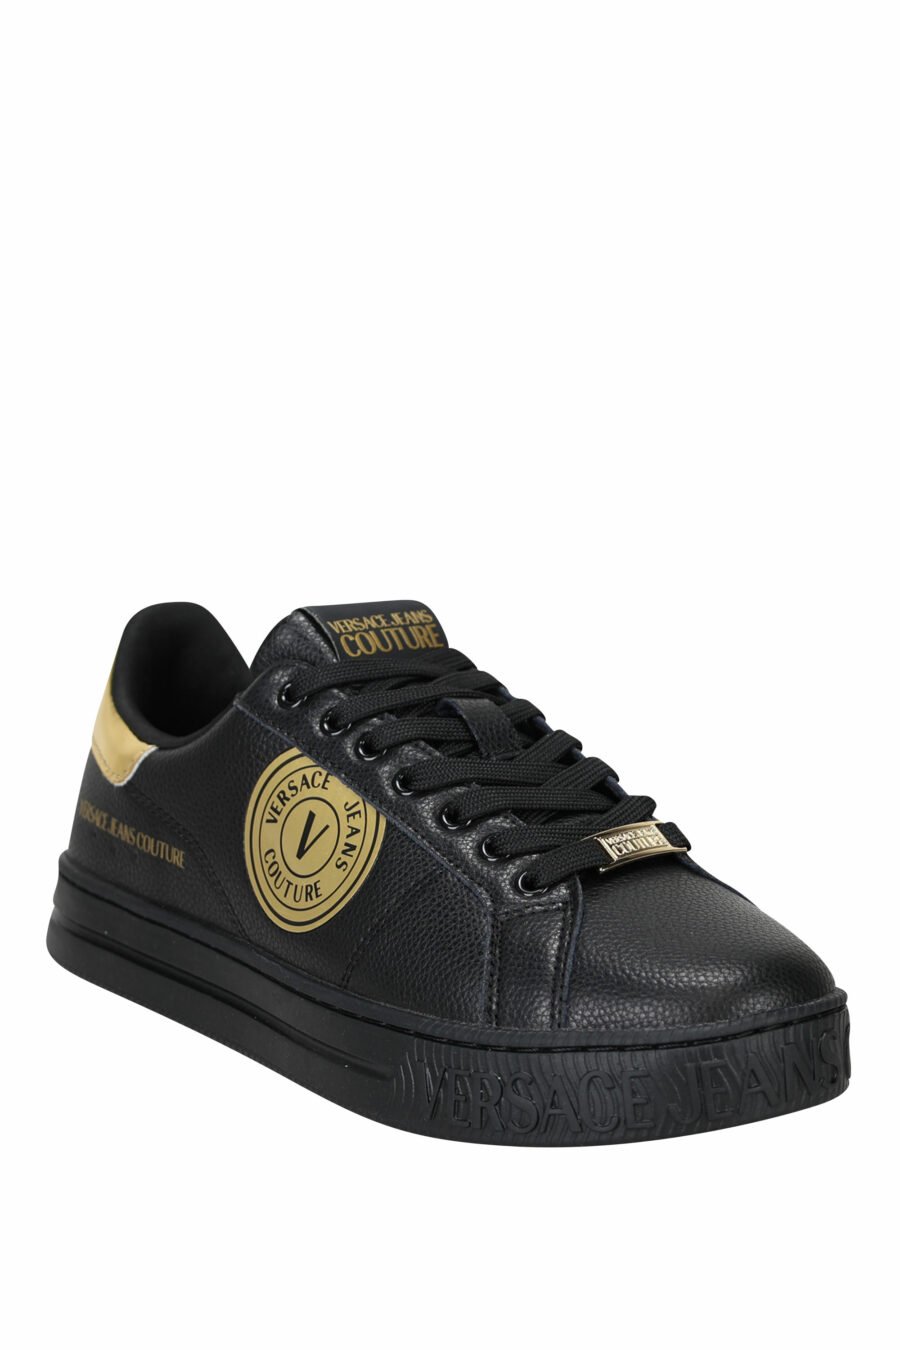 Black leather trainers with gold details and circular logo - 8052019453560 1